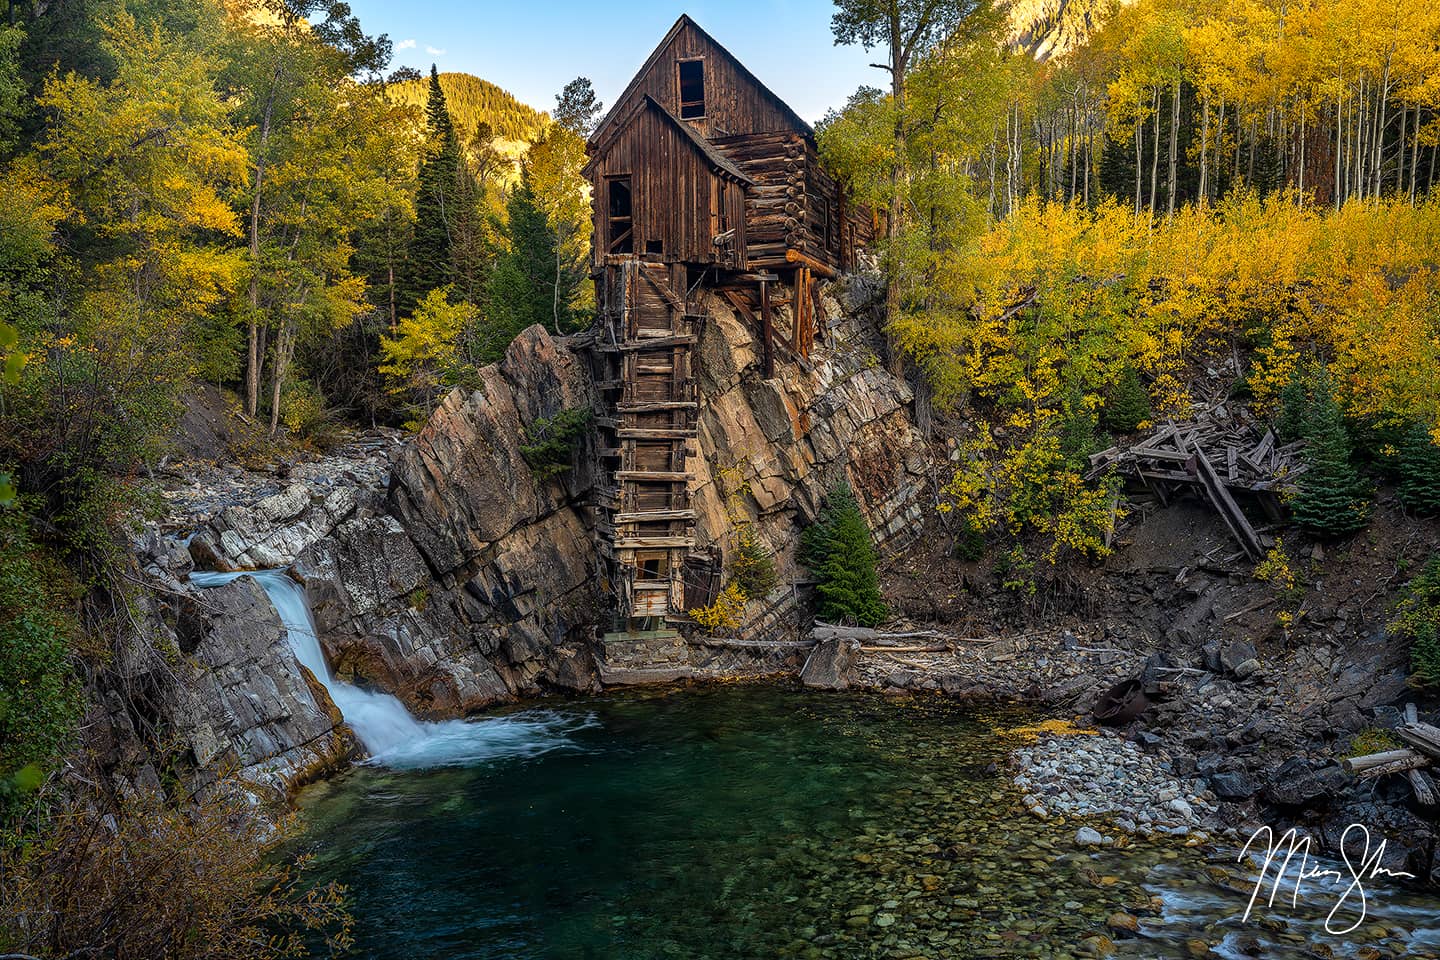 The Crystal Mill was built in 1892 and used as a wooden powerhouse on the Crystal River. It takes a 4x4 vehicle or a long hike to get up to it. Autumn colors at the Crystal Mill is a special time. It is such an iconic place at any time of the year. But when you visit in the fall, it becomes even more special! This was shot as the trees were mostly turned. There was still a hint of green, but gold had mostly settled in. It is a true Colorado icon!